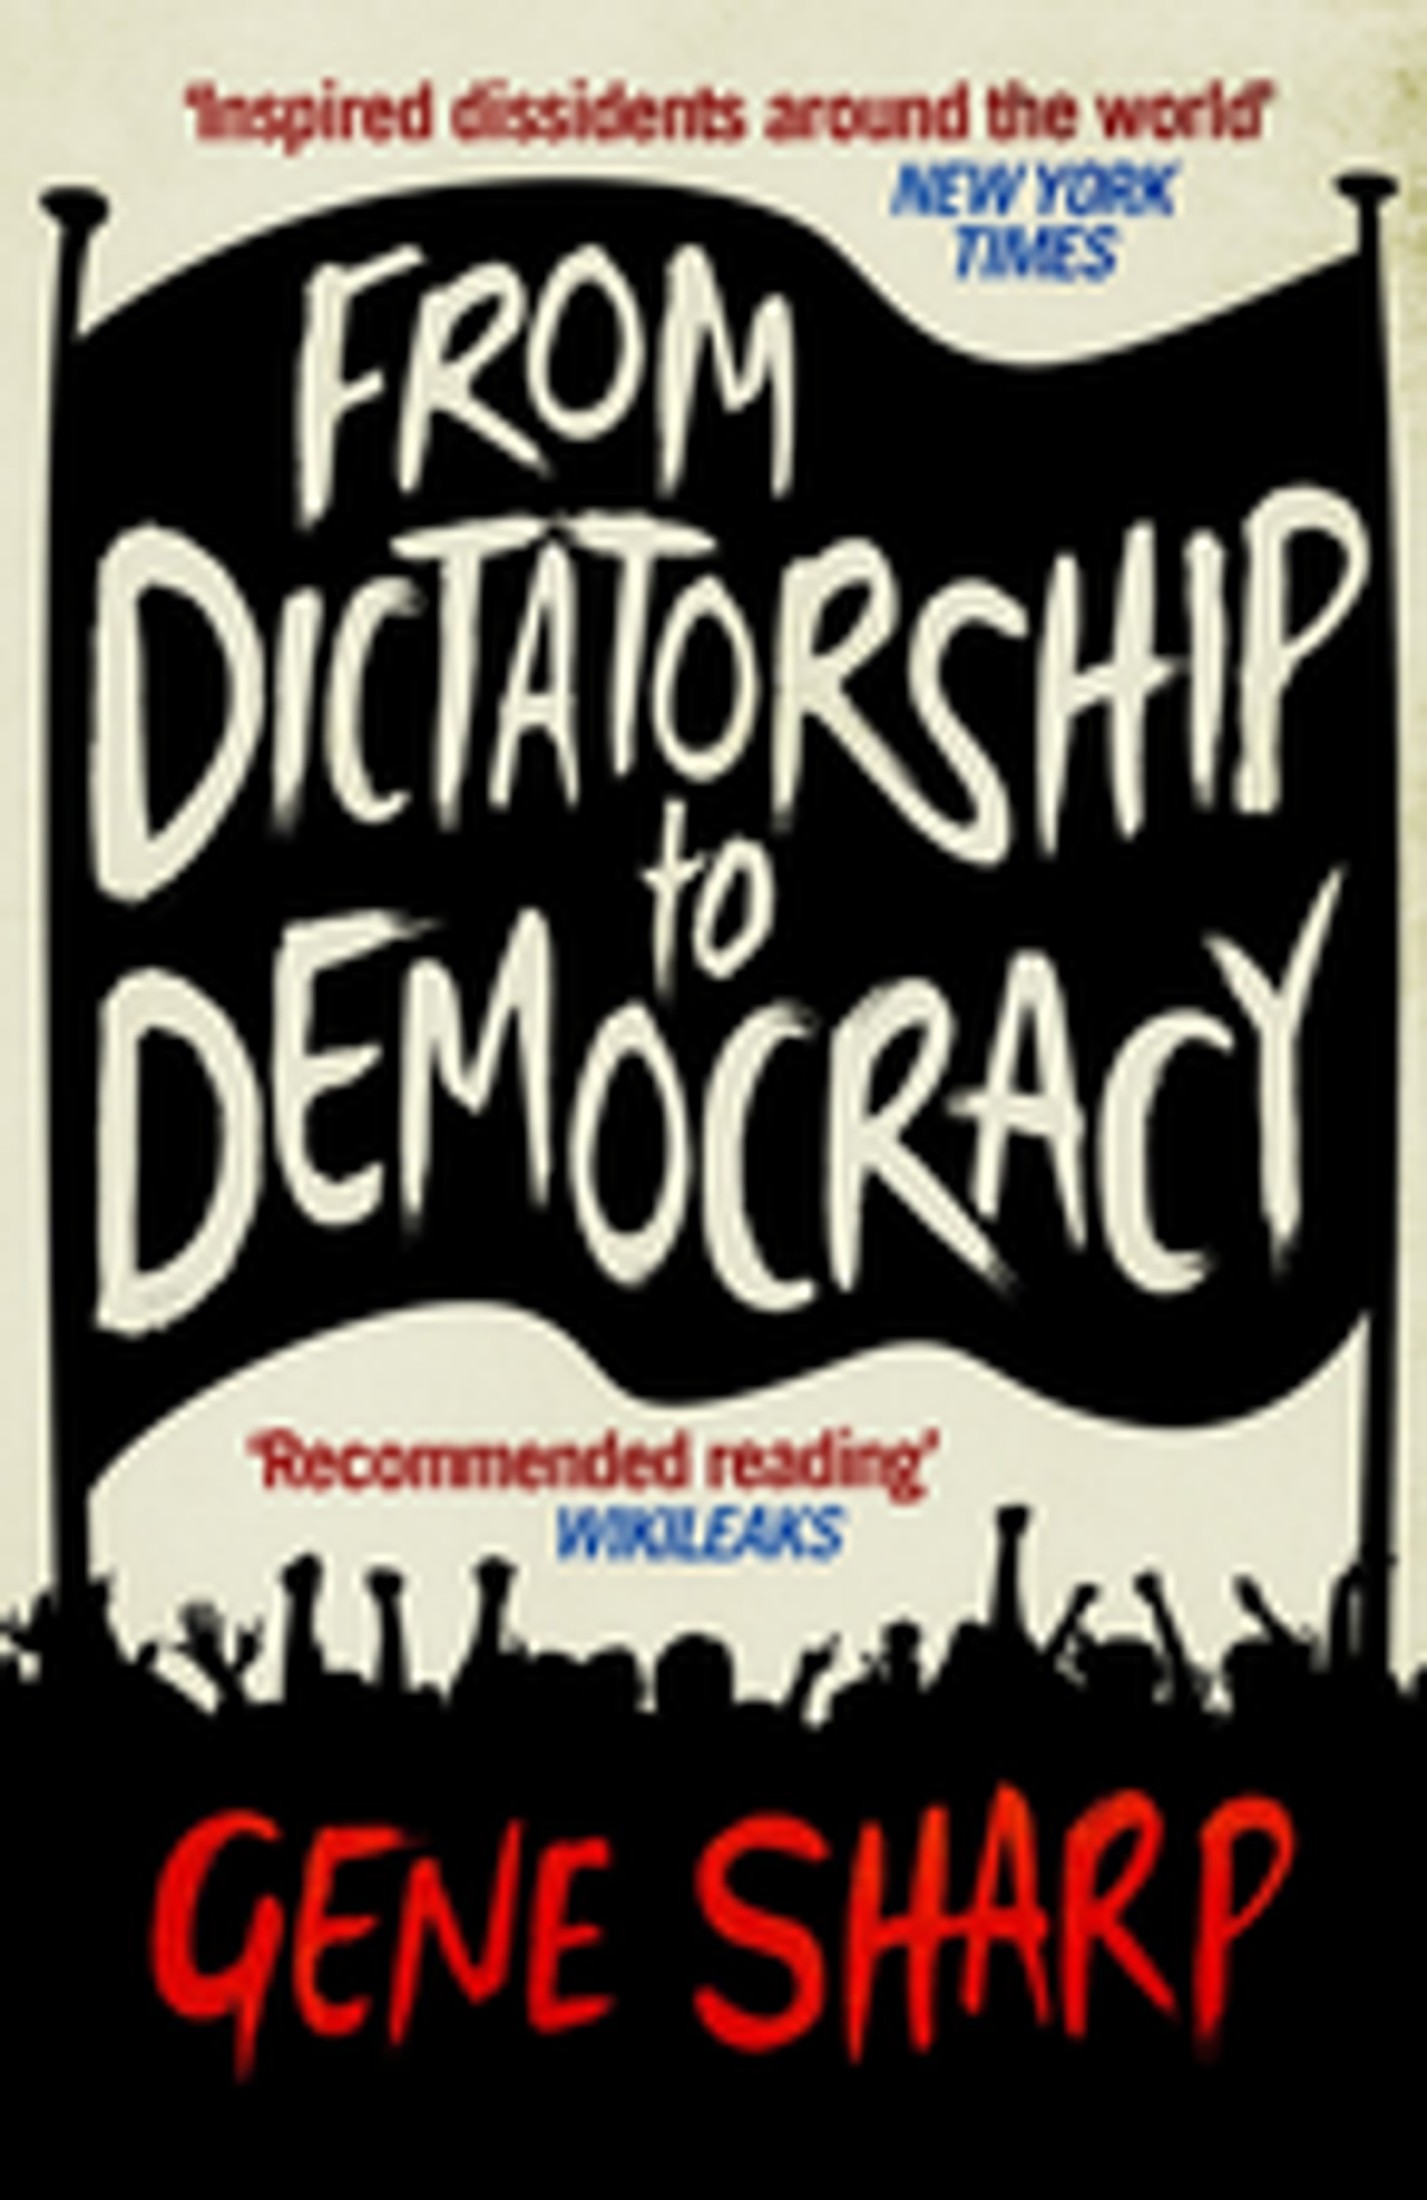 From Dictatorship to Democracy (2011) by Gene Sharp